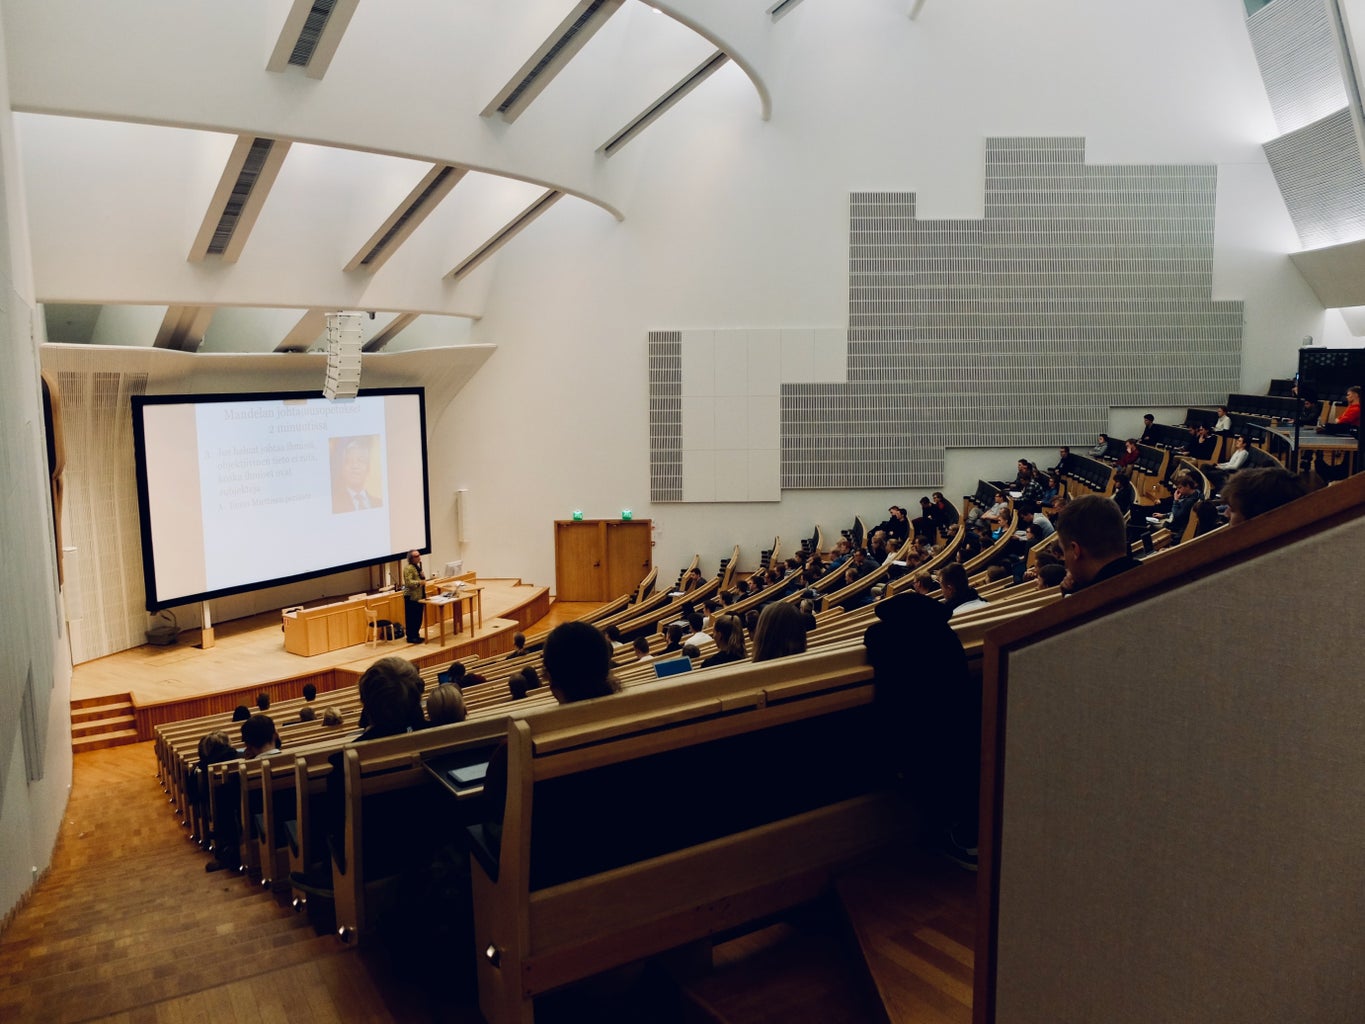 Students in an auditorium class at Aalto University in Espoo, Finland with a lecturer at the front.